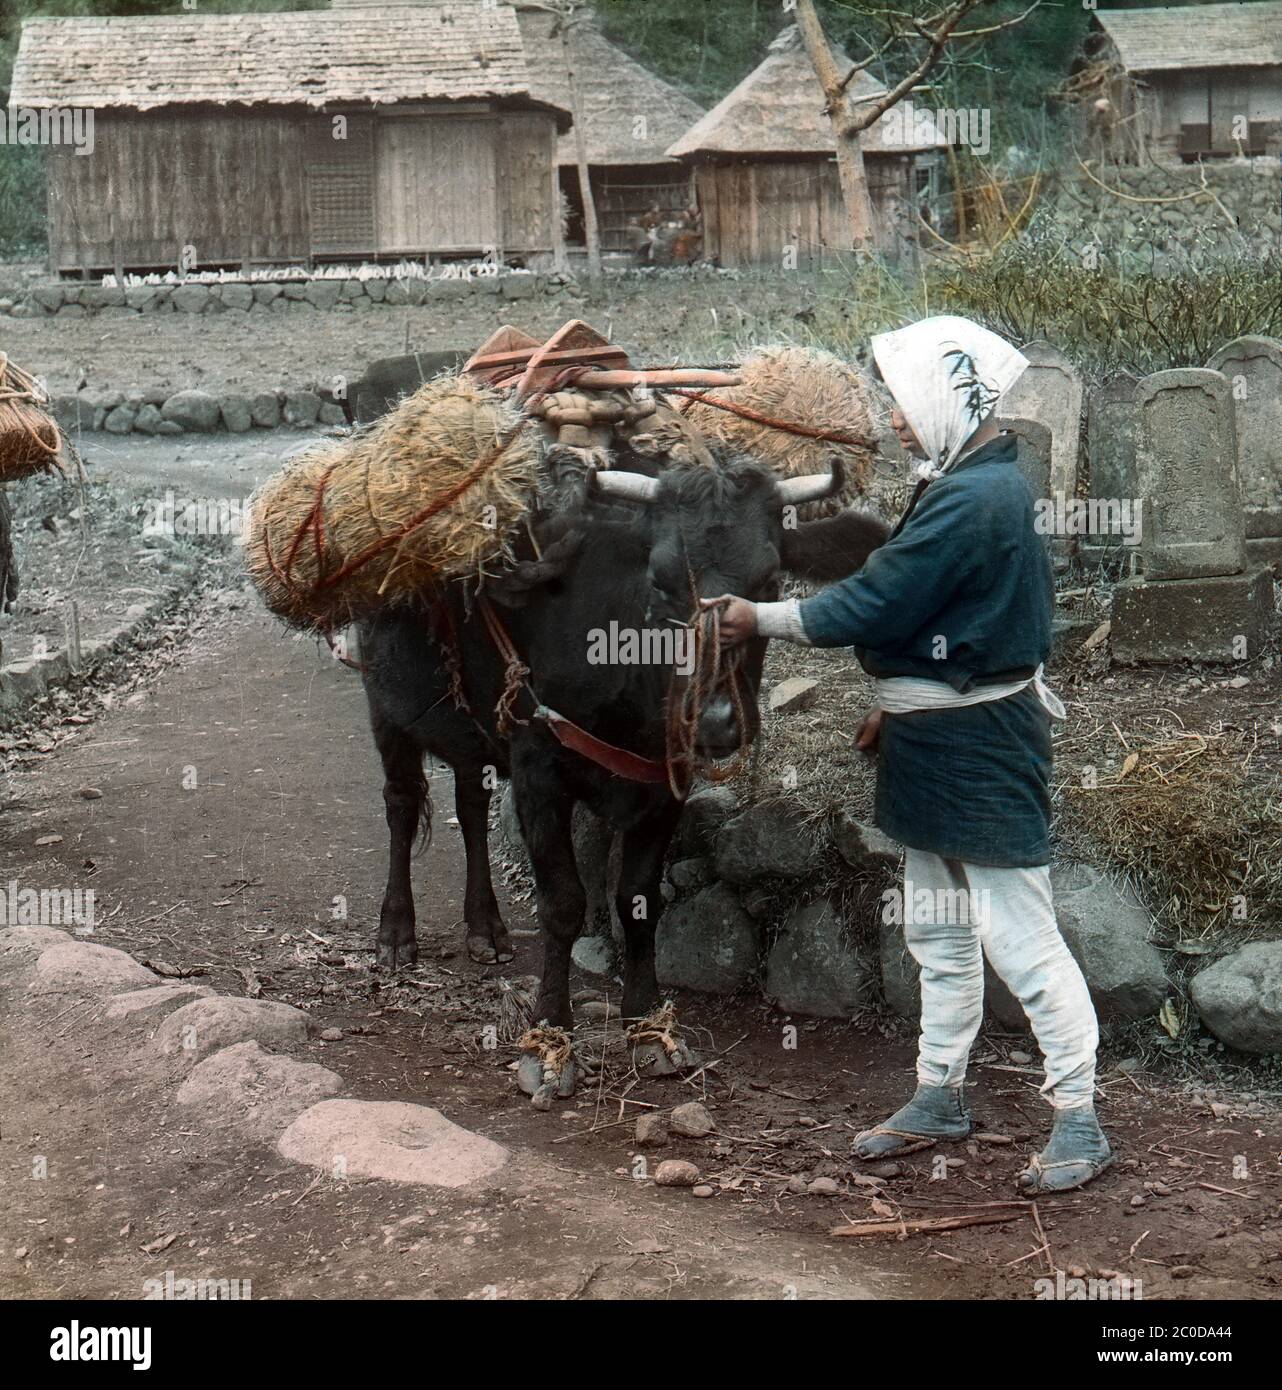 [ 1900s Japan - Ox with Rice Bags ] — A farmer stands next to an ox loaded with tawara (俵, straw rice bags).  In the back, farm buildings can be seen.  20th century vintage glass slide. Stock Photo